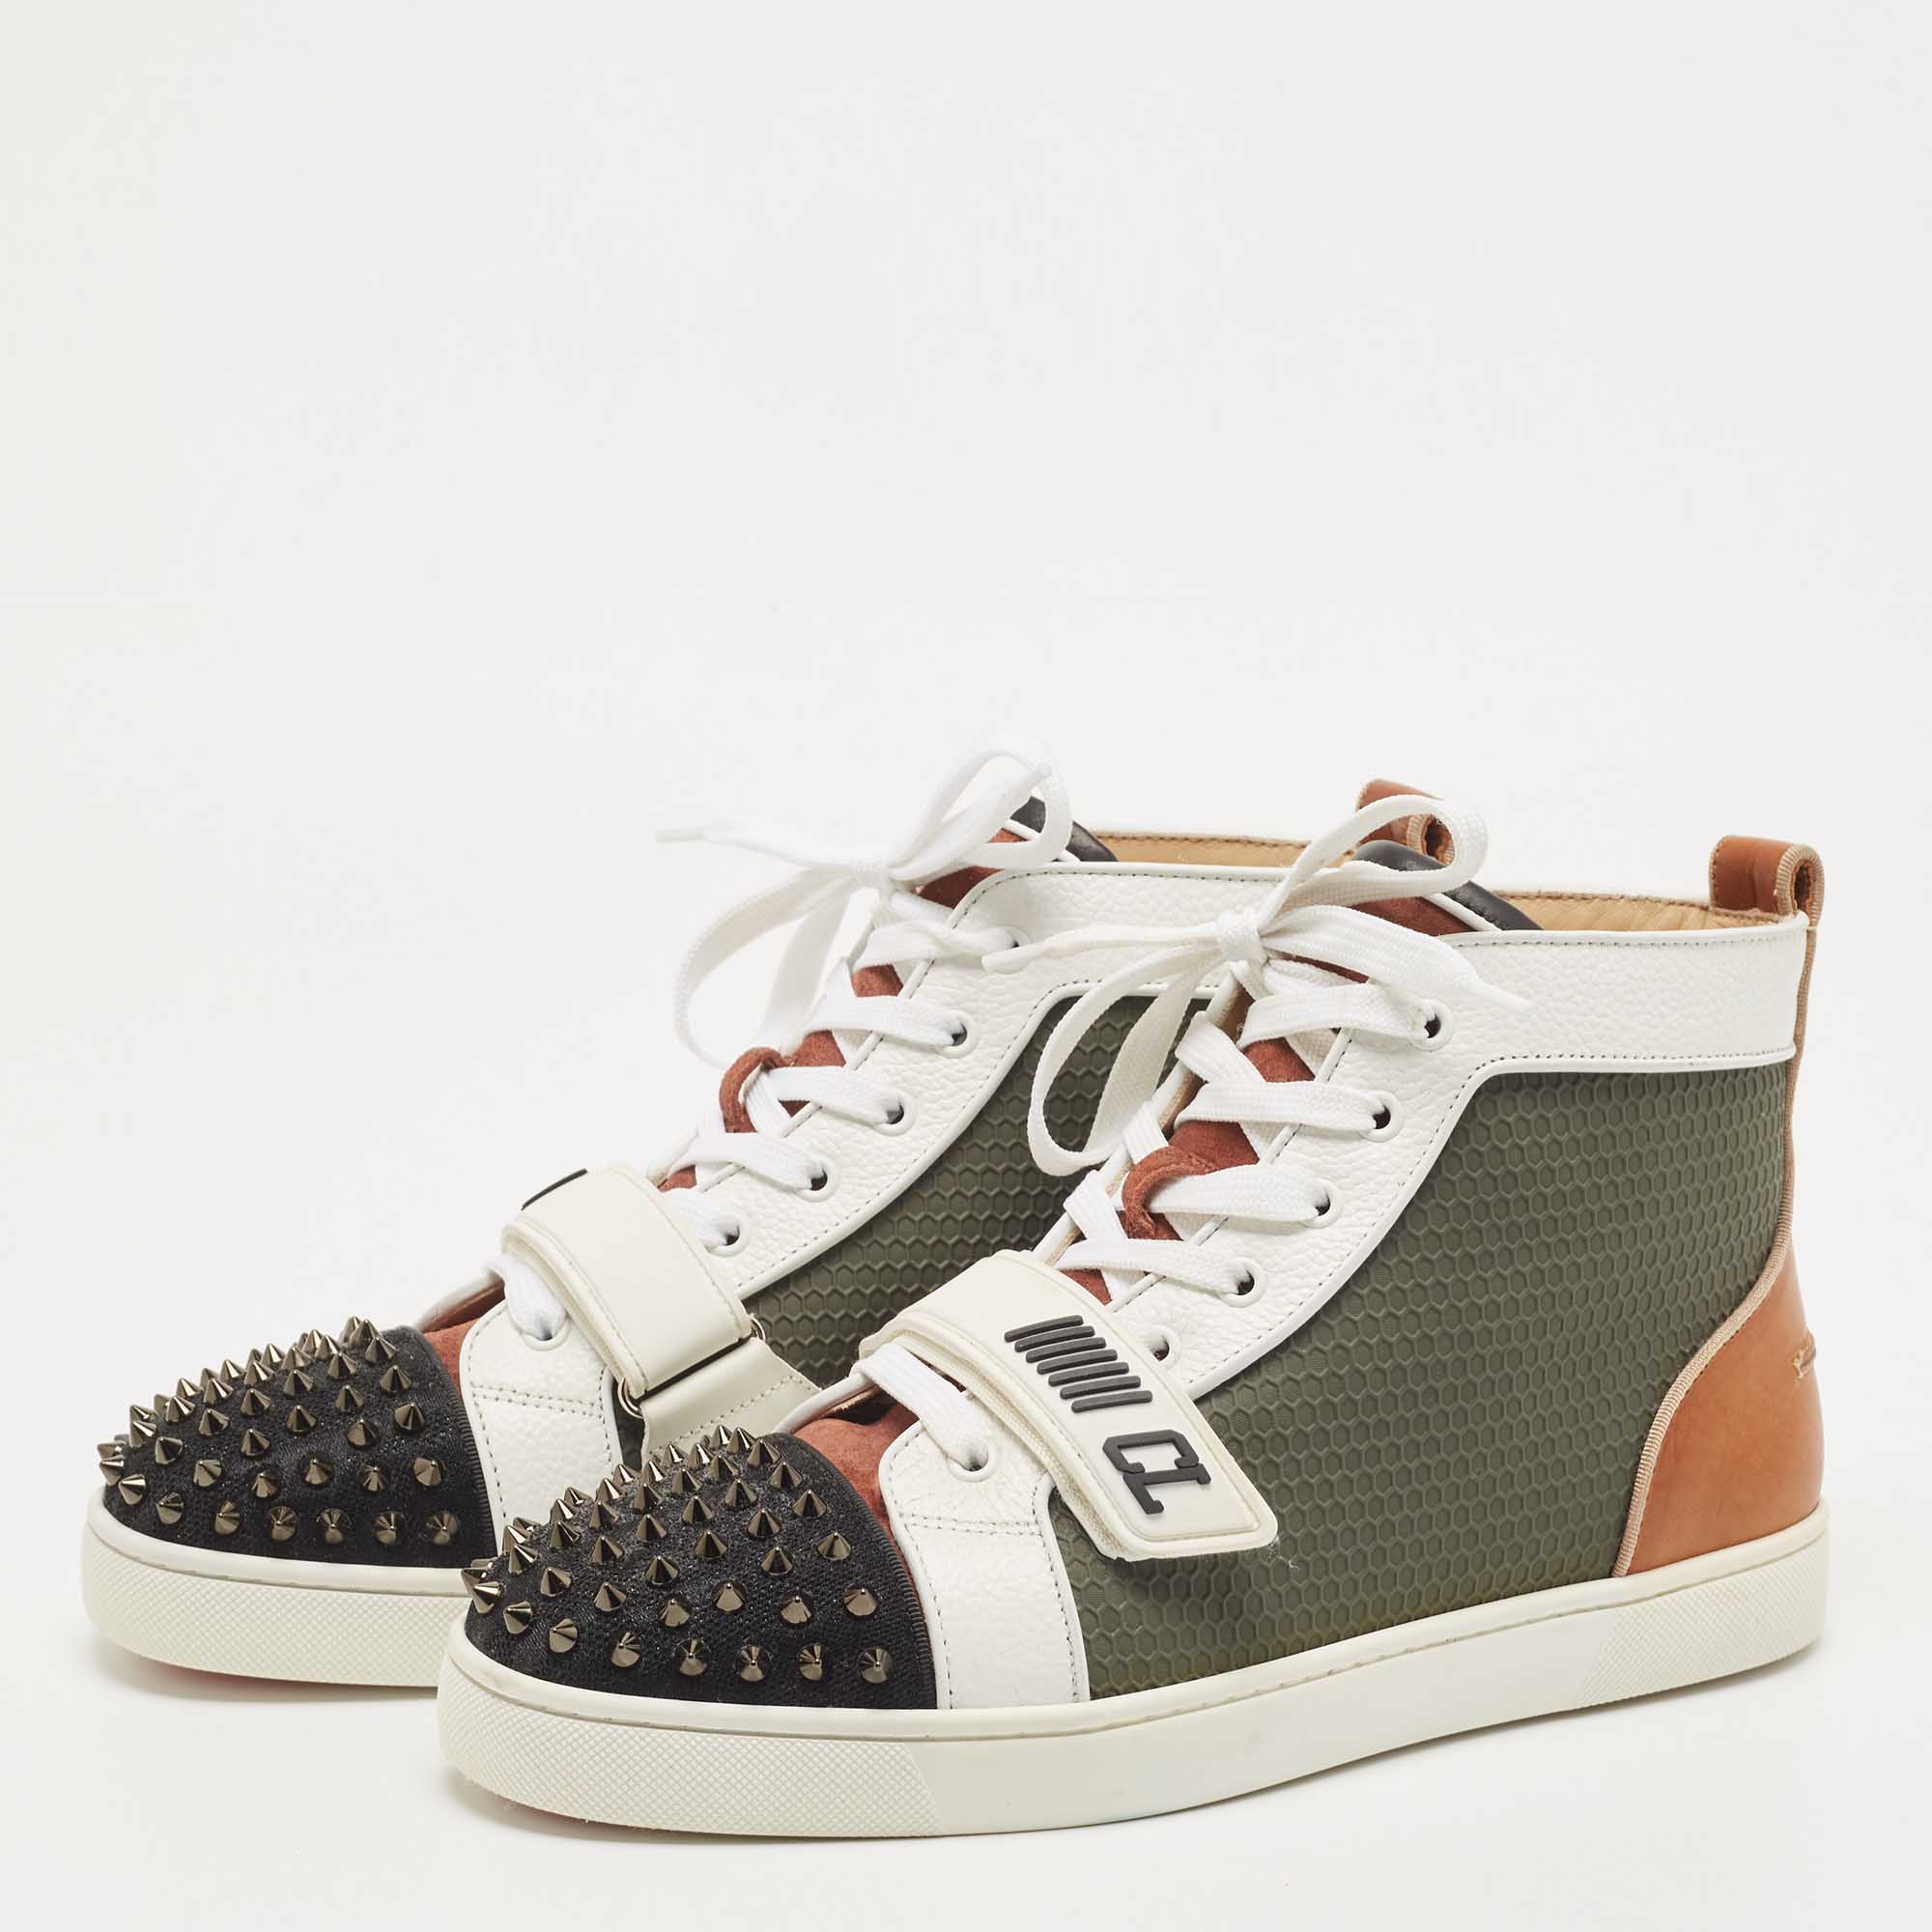 

Christian Louboutin Multicolor Leather Lou Spike High Top Sneakers Size